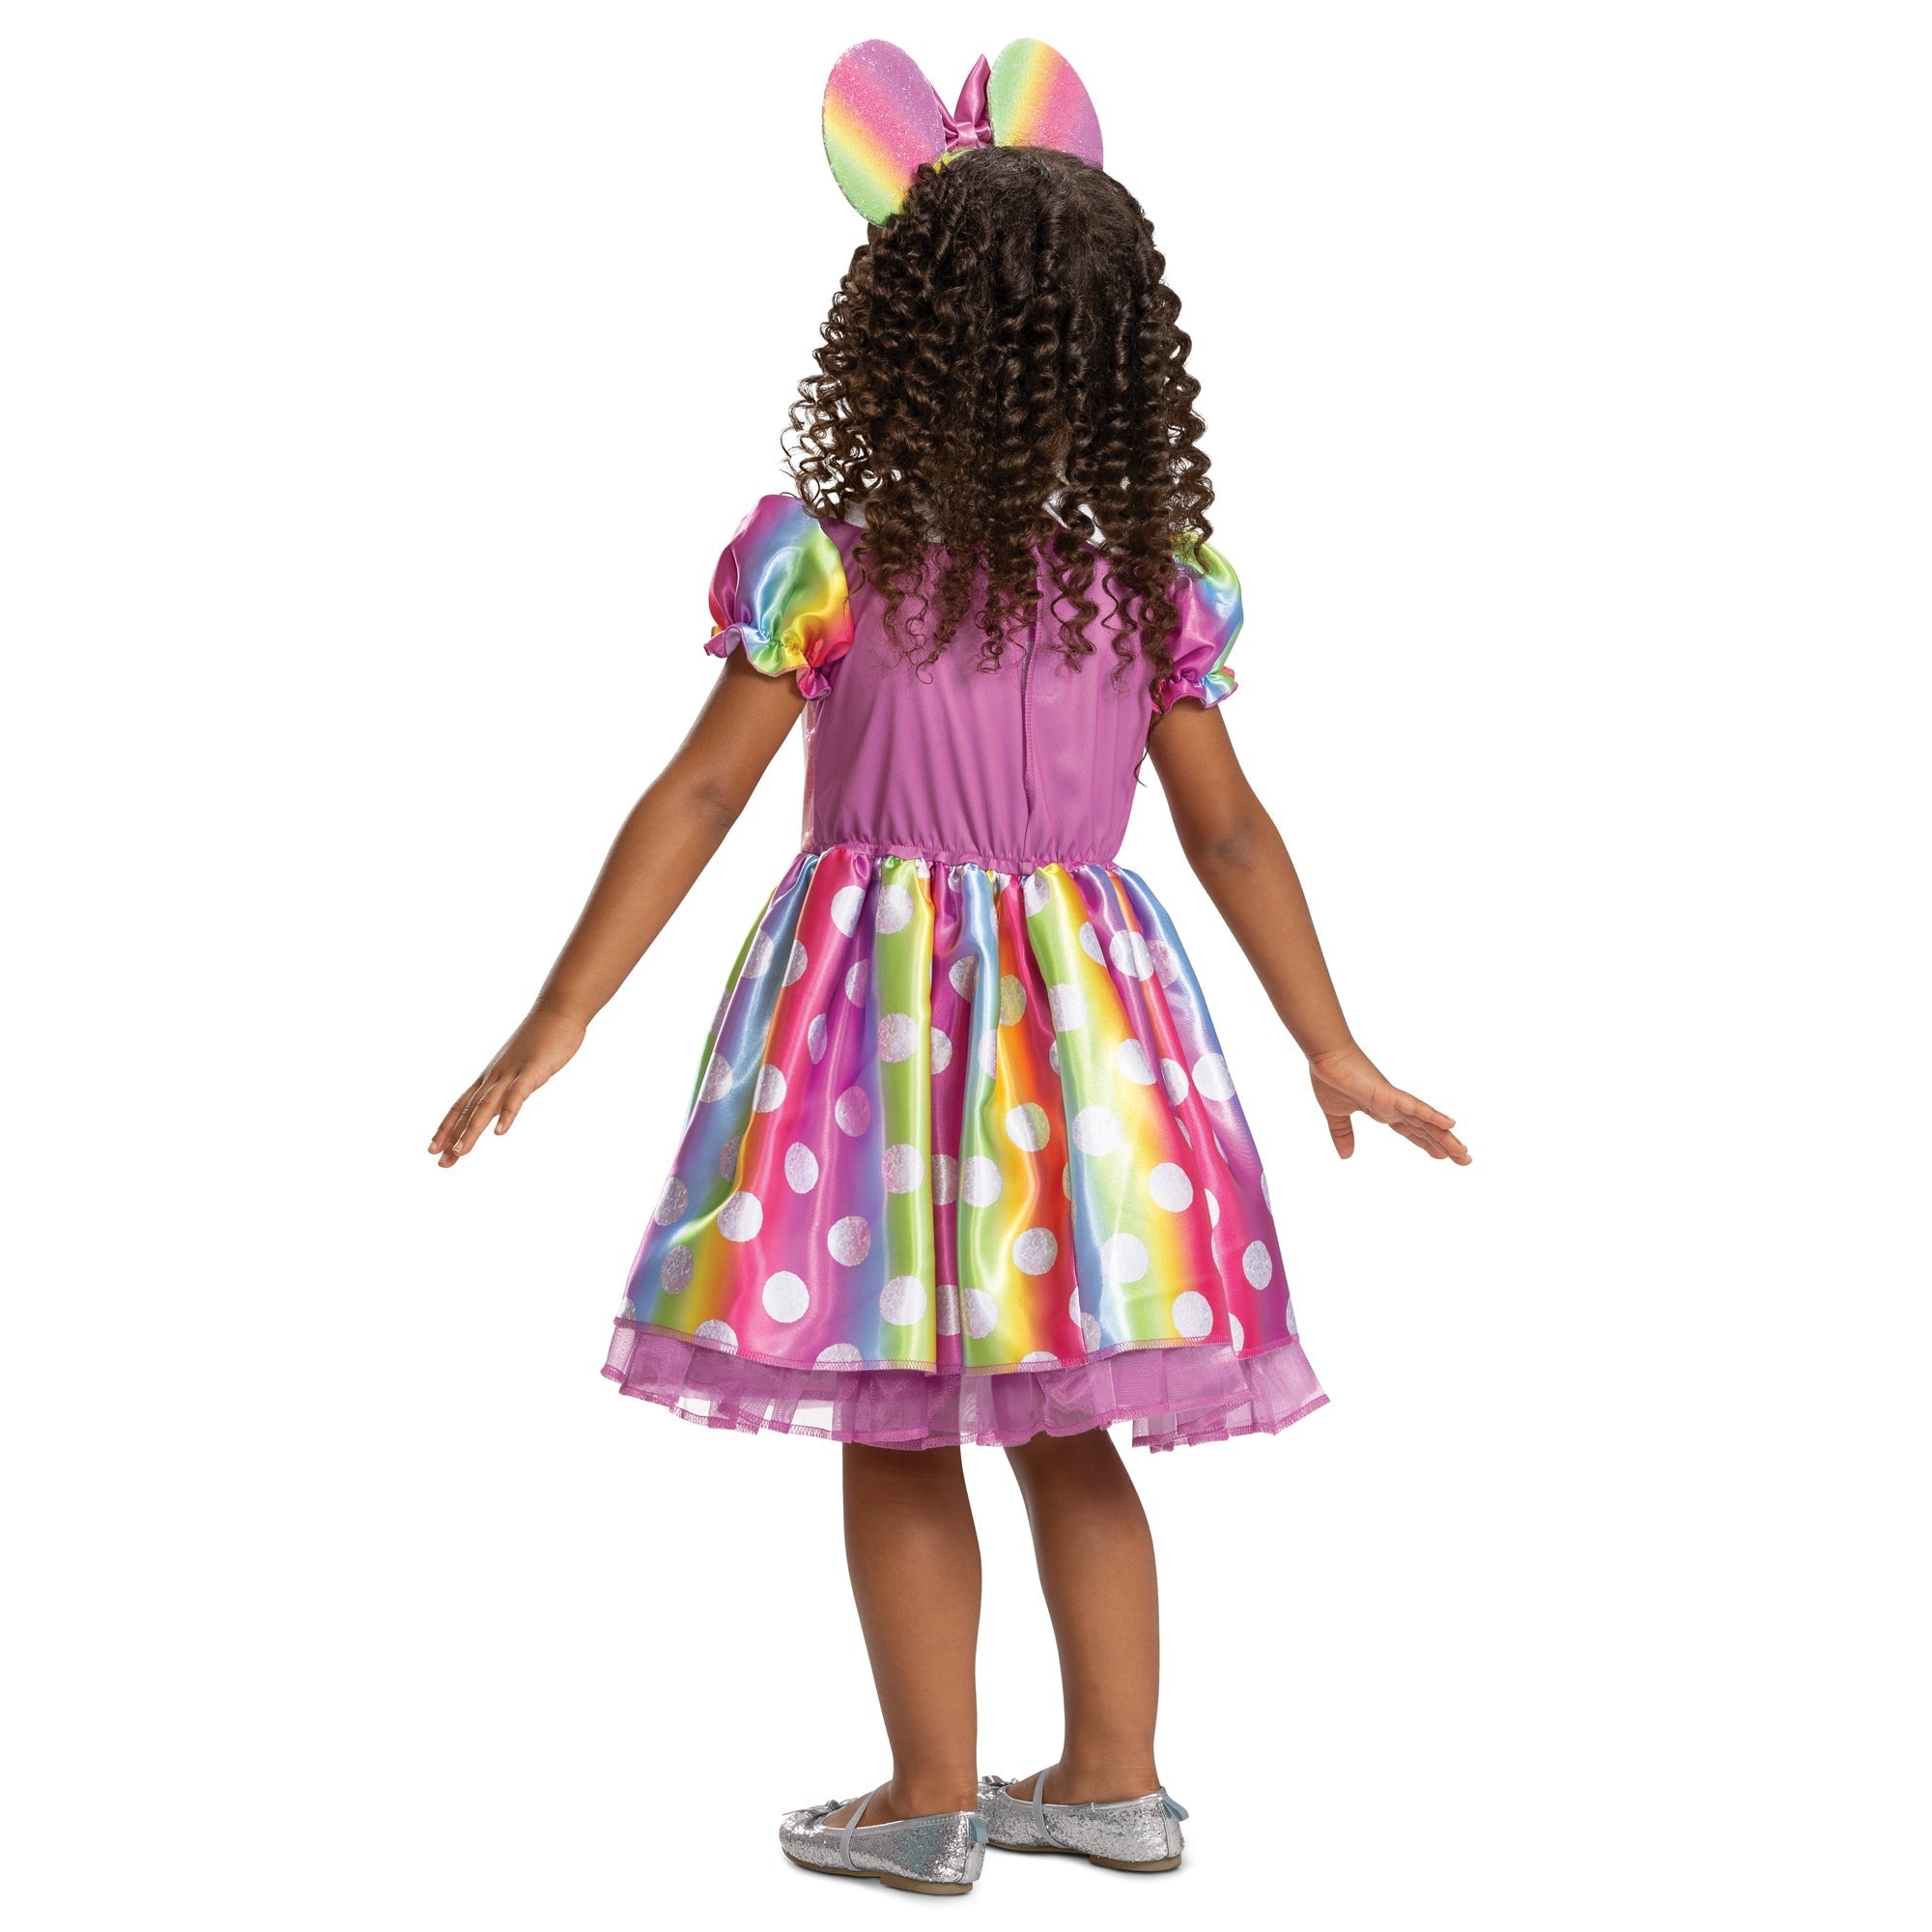 Disguise Clubhouse Minnie Mouse Glow in the Dark Girl's Halloween  Fancy-Dress Costume for Toddler, 3T-4T 